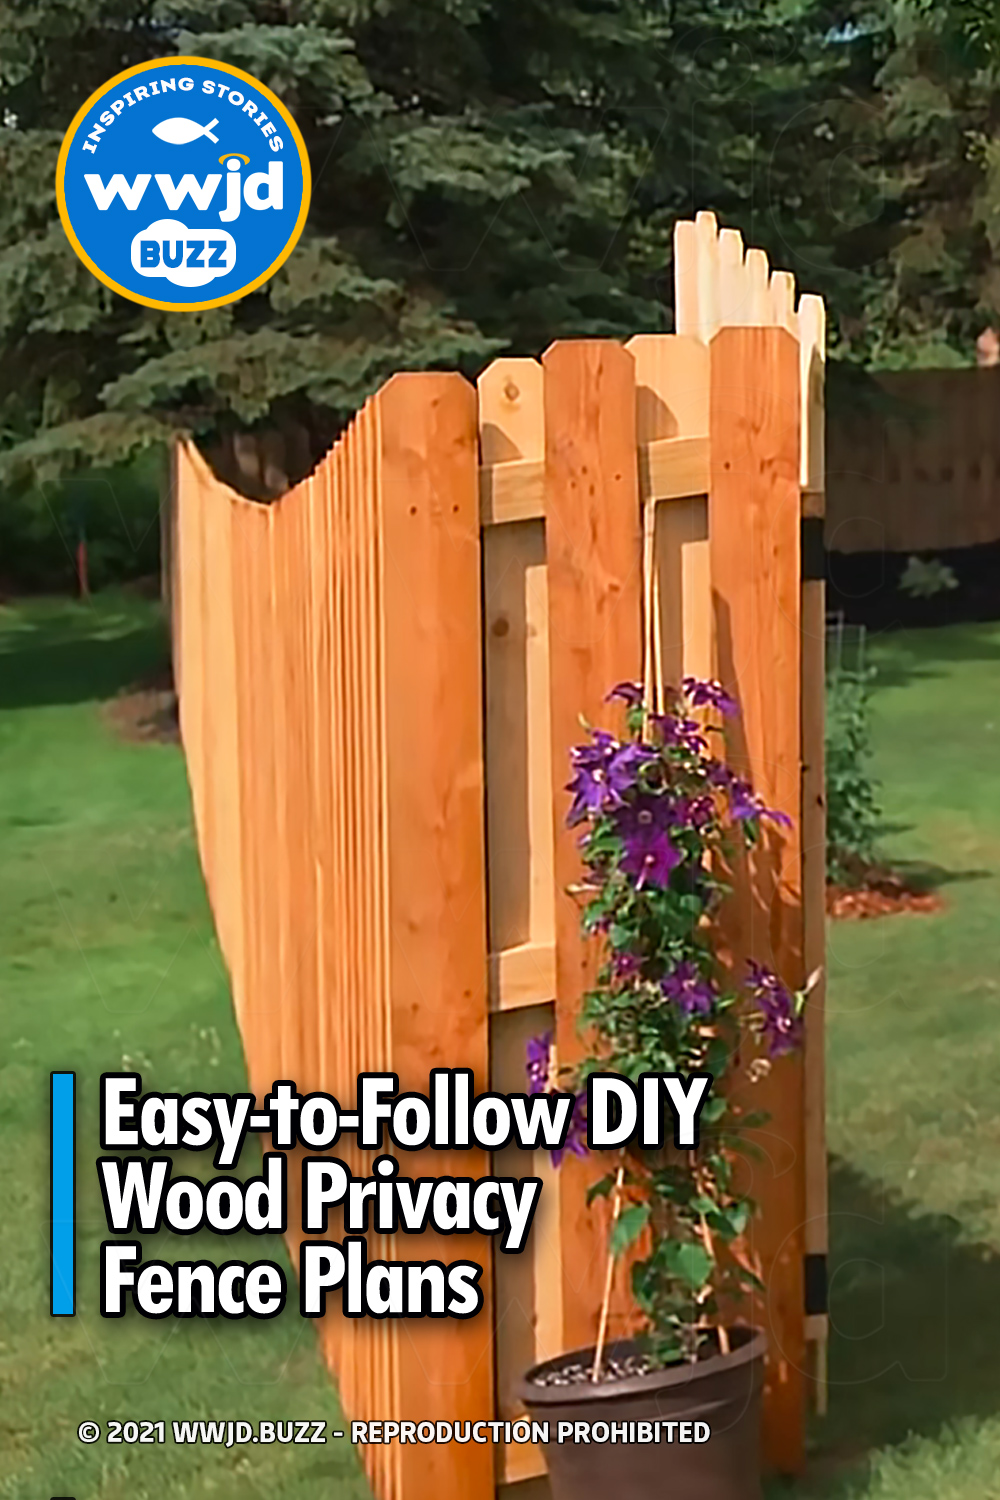 Easy-to-Follow DIY Wood Privacy Fence Plans